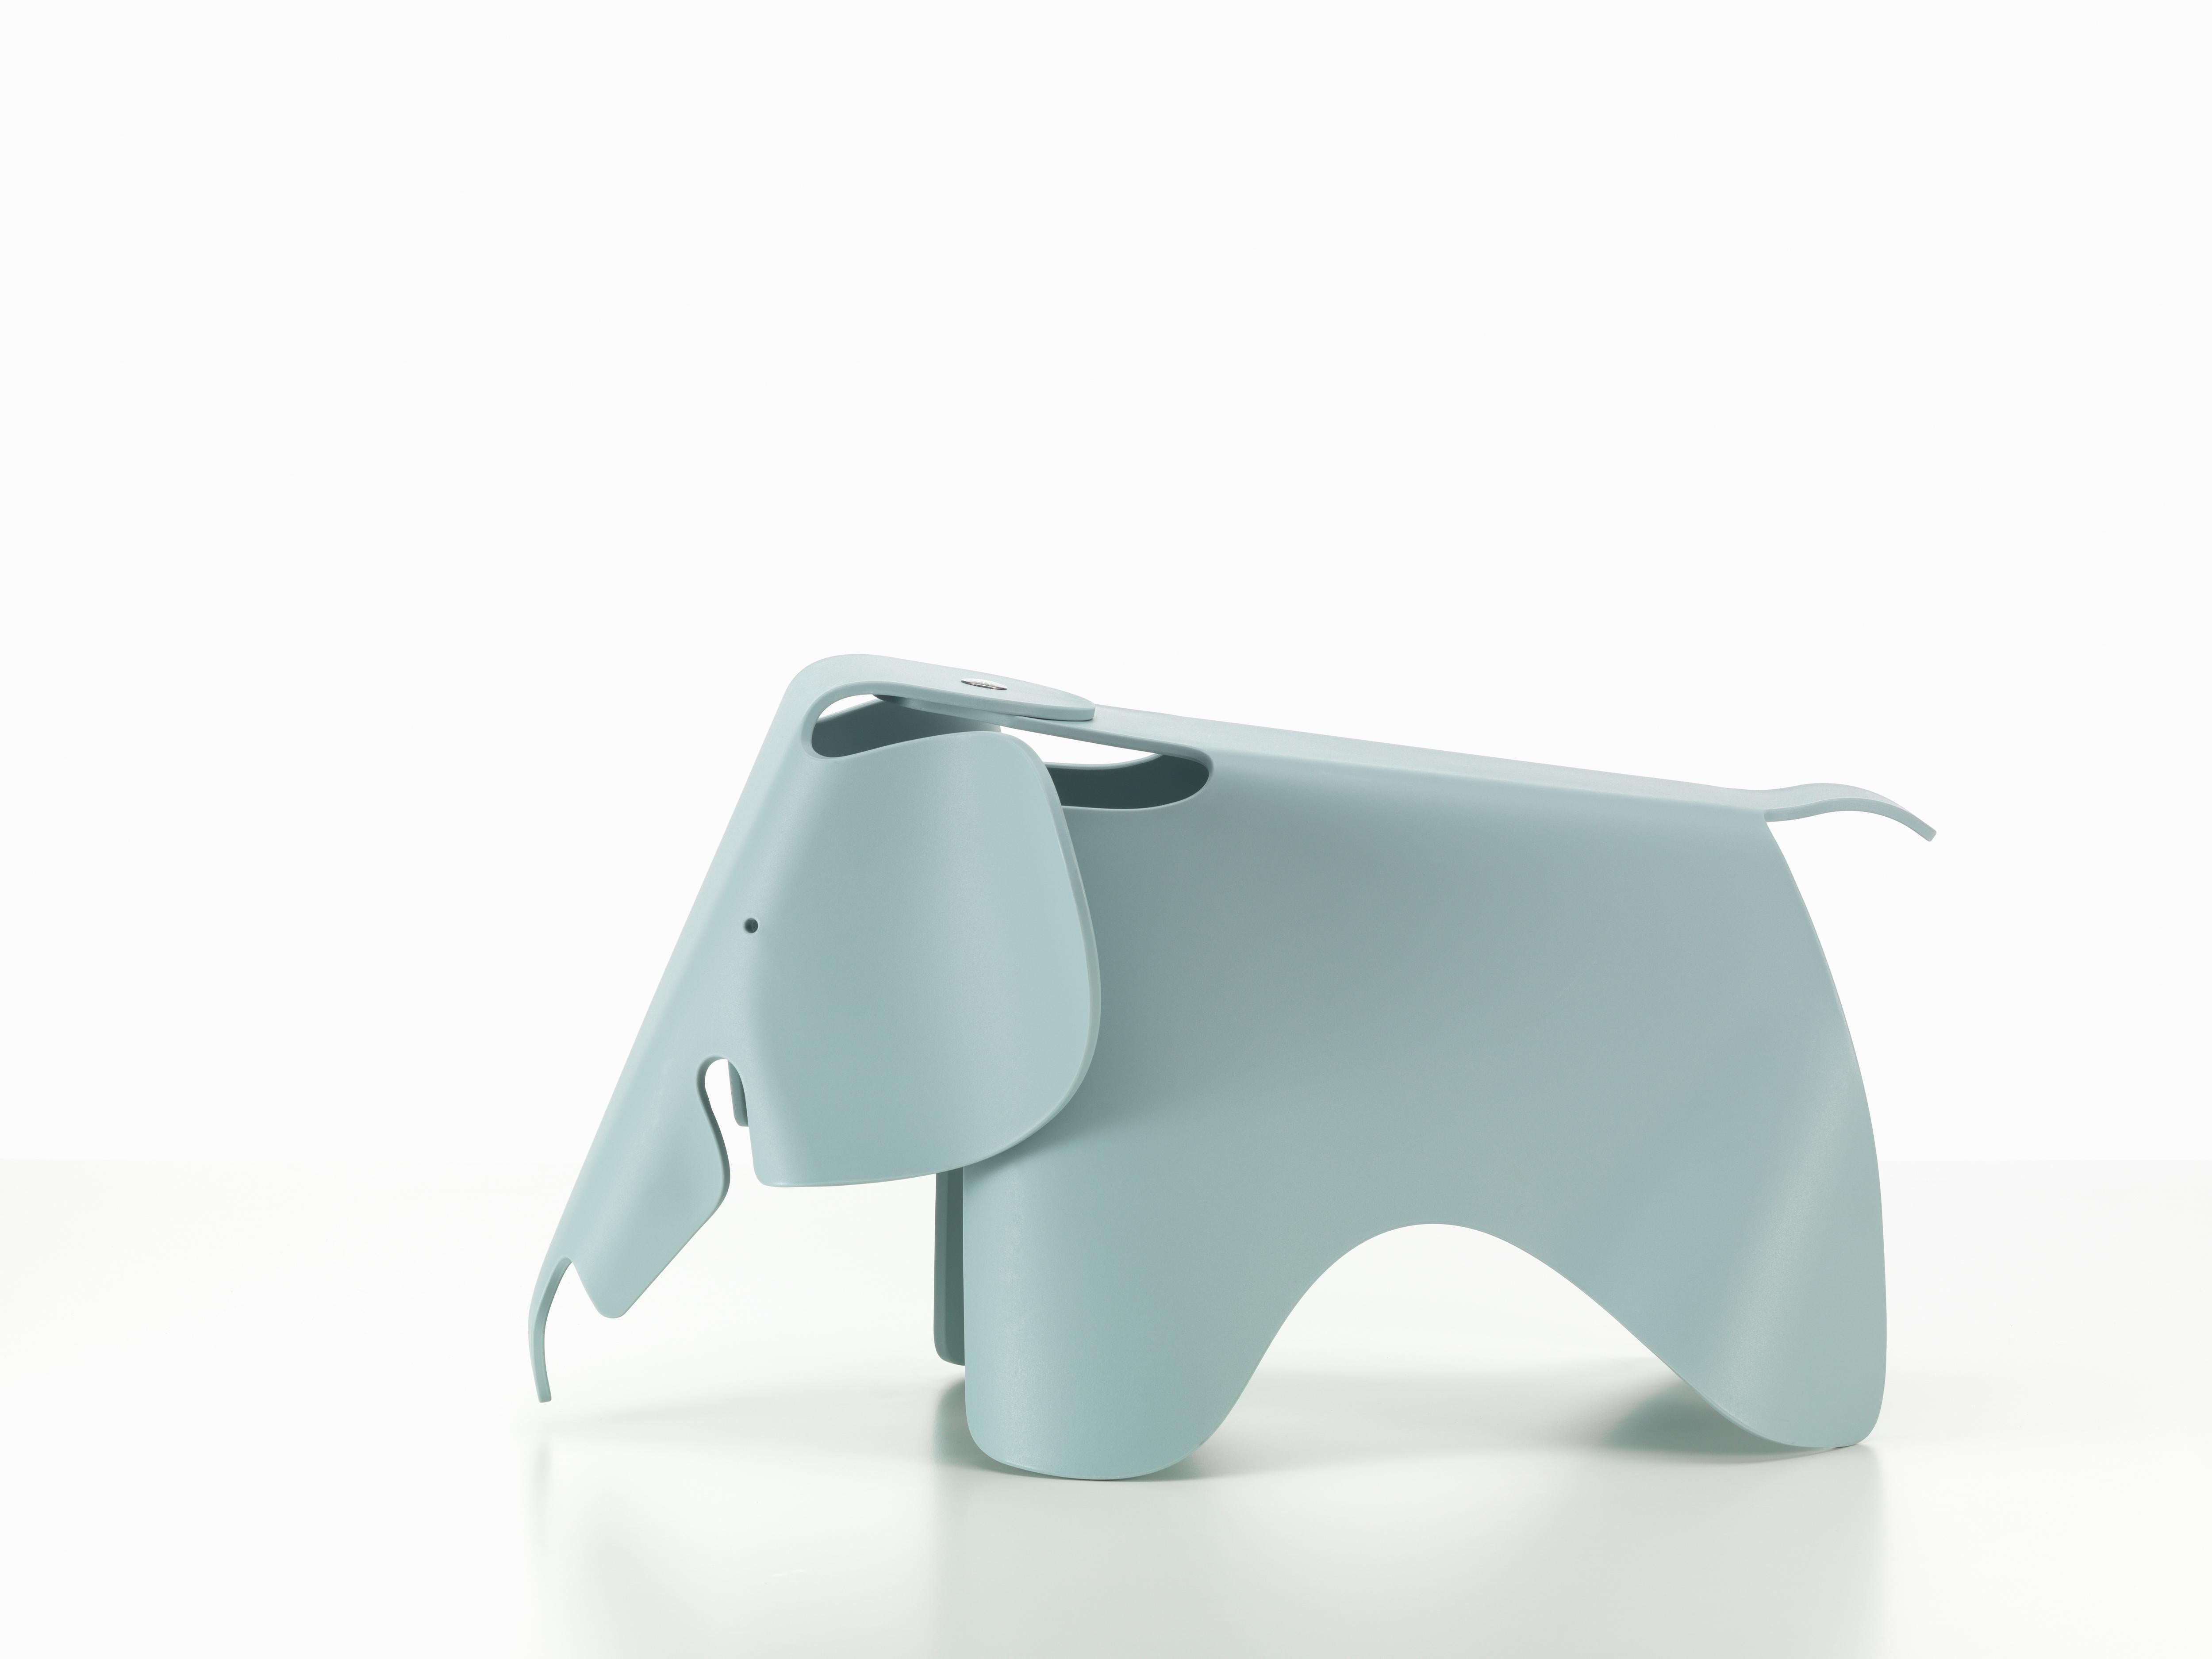 These items are currently only available in the United States.

Charles and Ray Eames developed a toy elephant made of plywood in 1945. Manufactured in plastic, the Eames Elephant can now be enjoyed by the target group for which it was originally